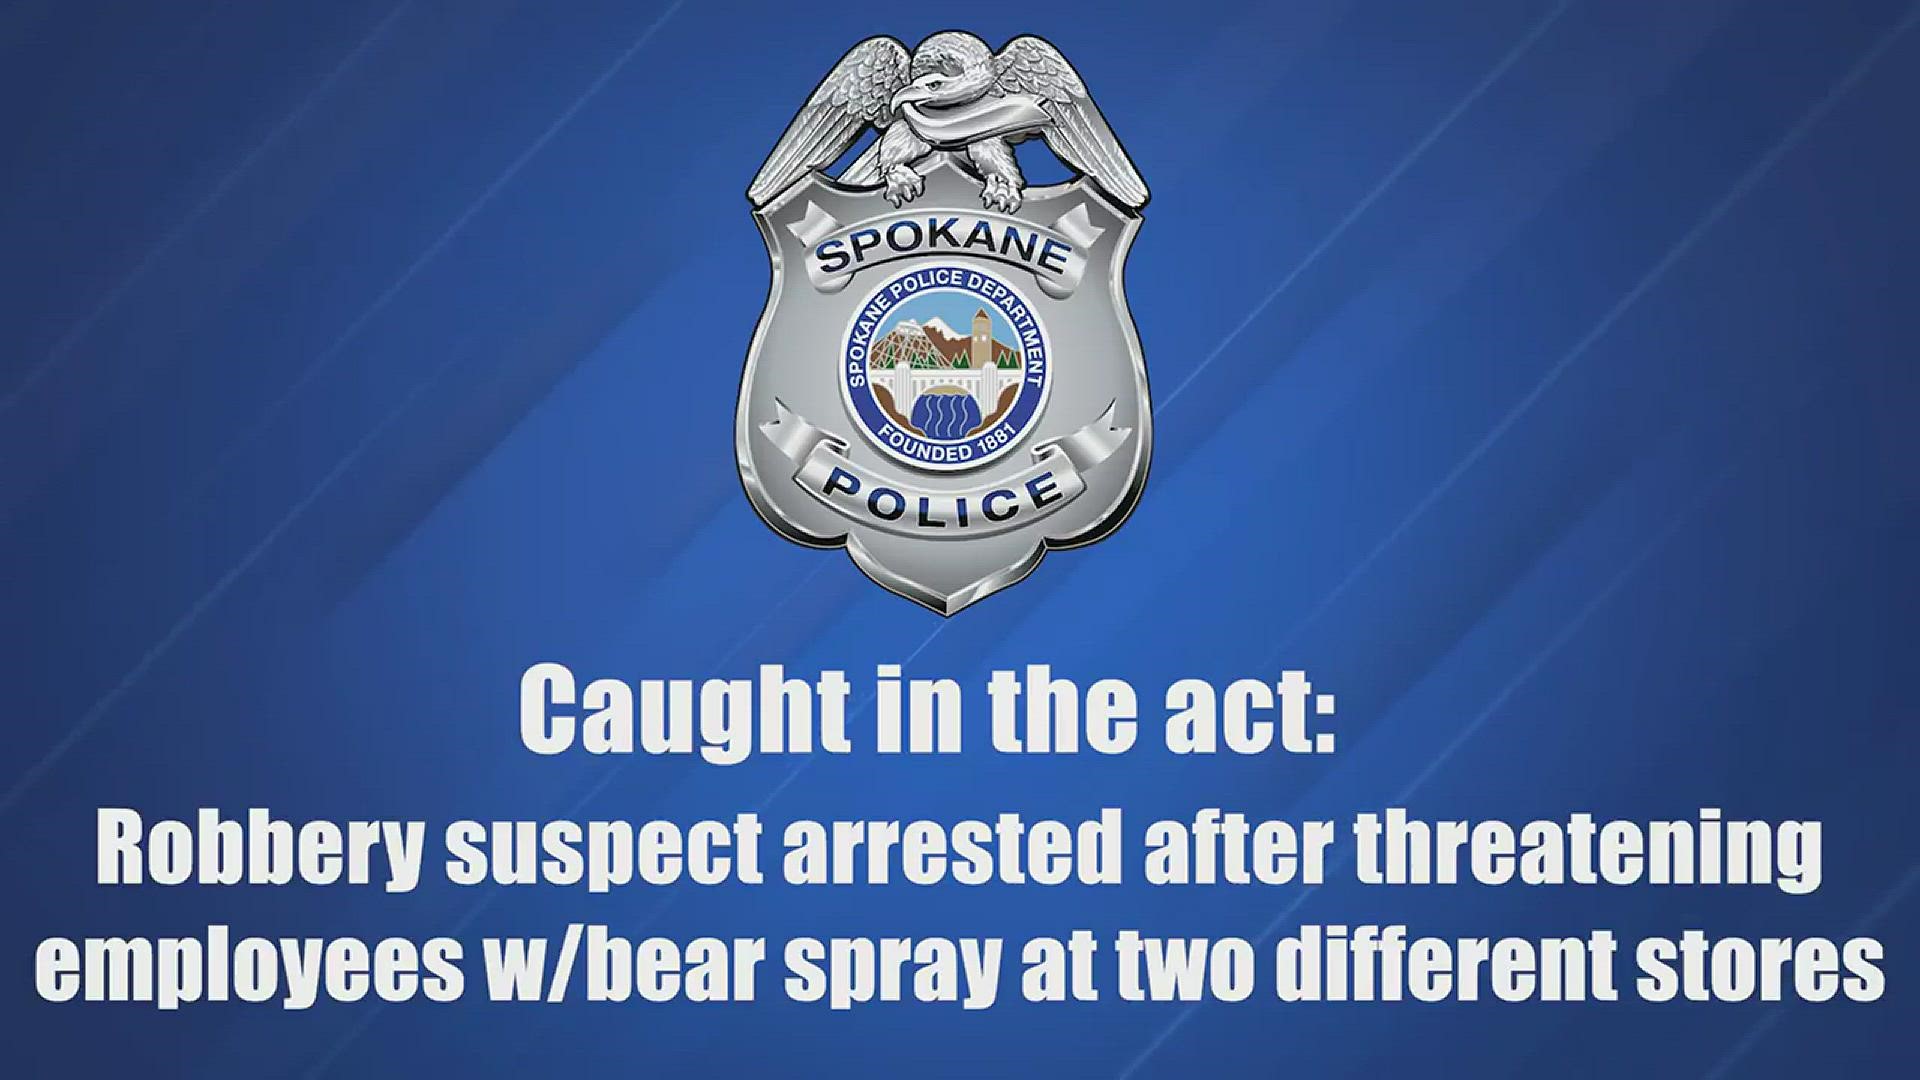 Spokane police said the suspect loaded a cart with thousands of dollars worth of merchandise and threatened employees with bear spray. Credit: SPD